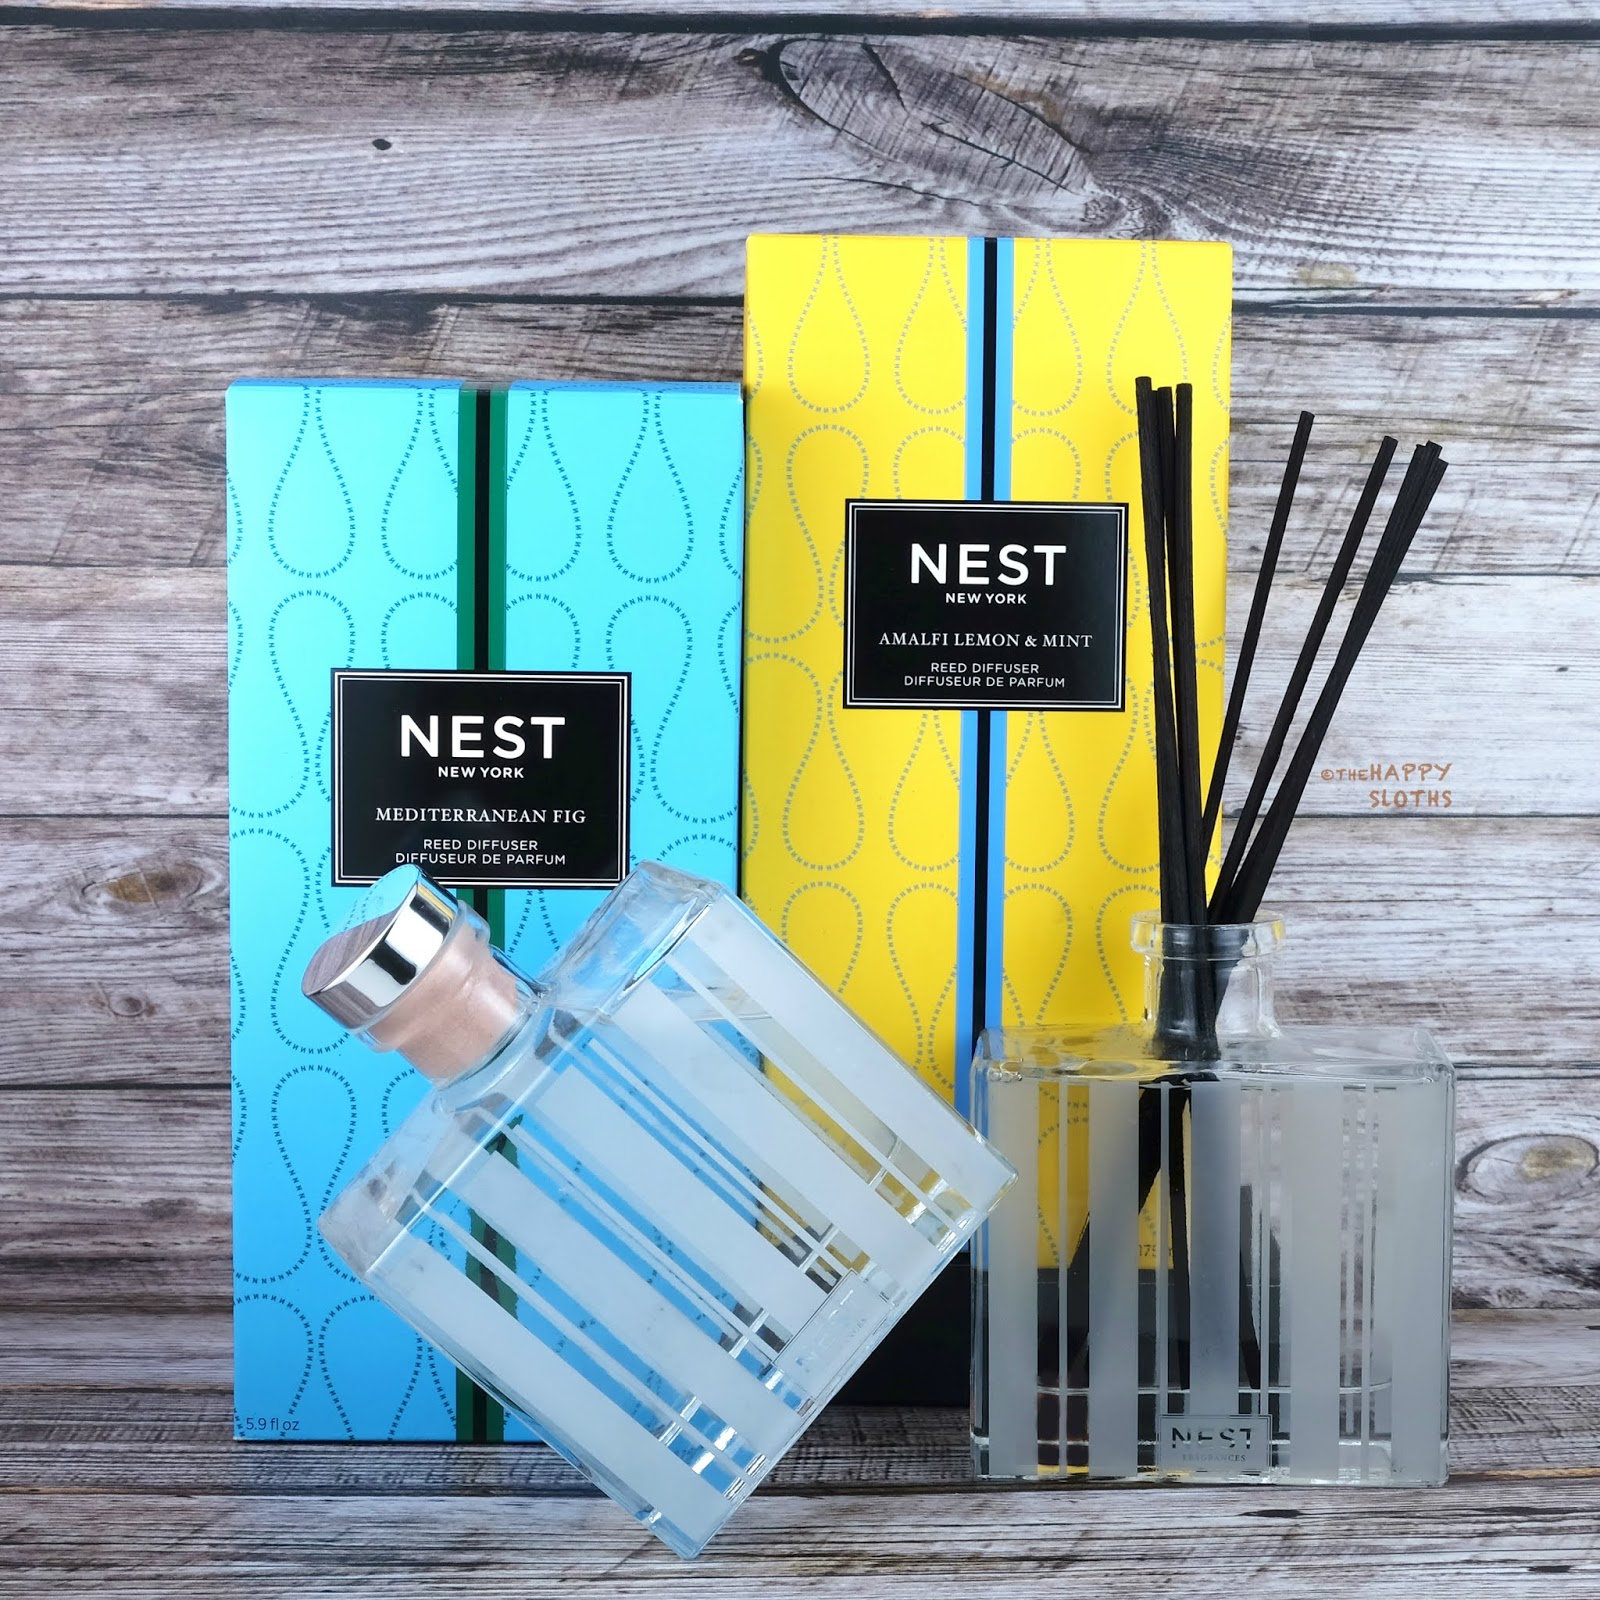 NEST Fragrances | Amalfi Lemon & Mint Candle and Mediterranean Fig Reed Diffuser: Review